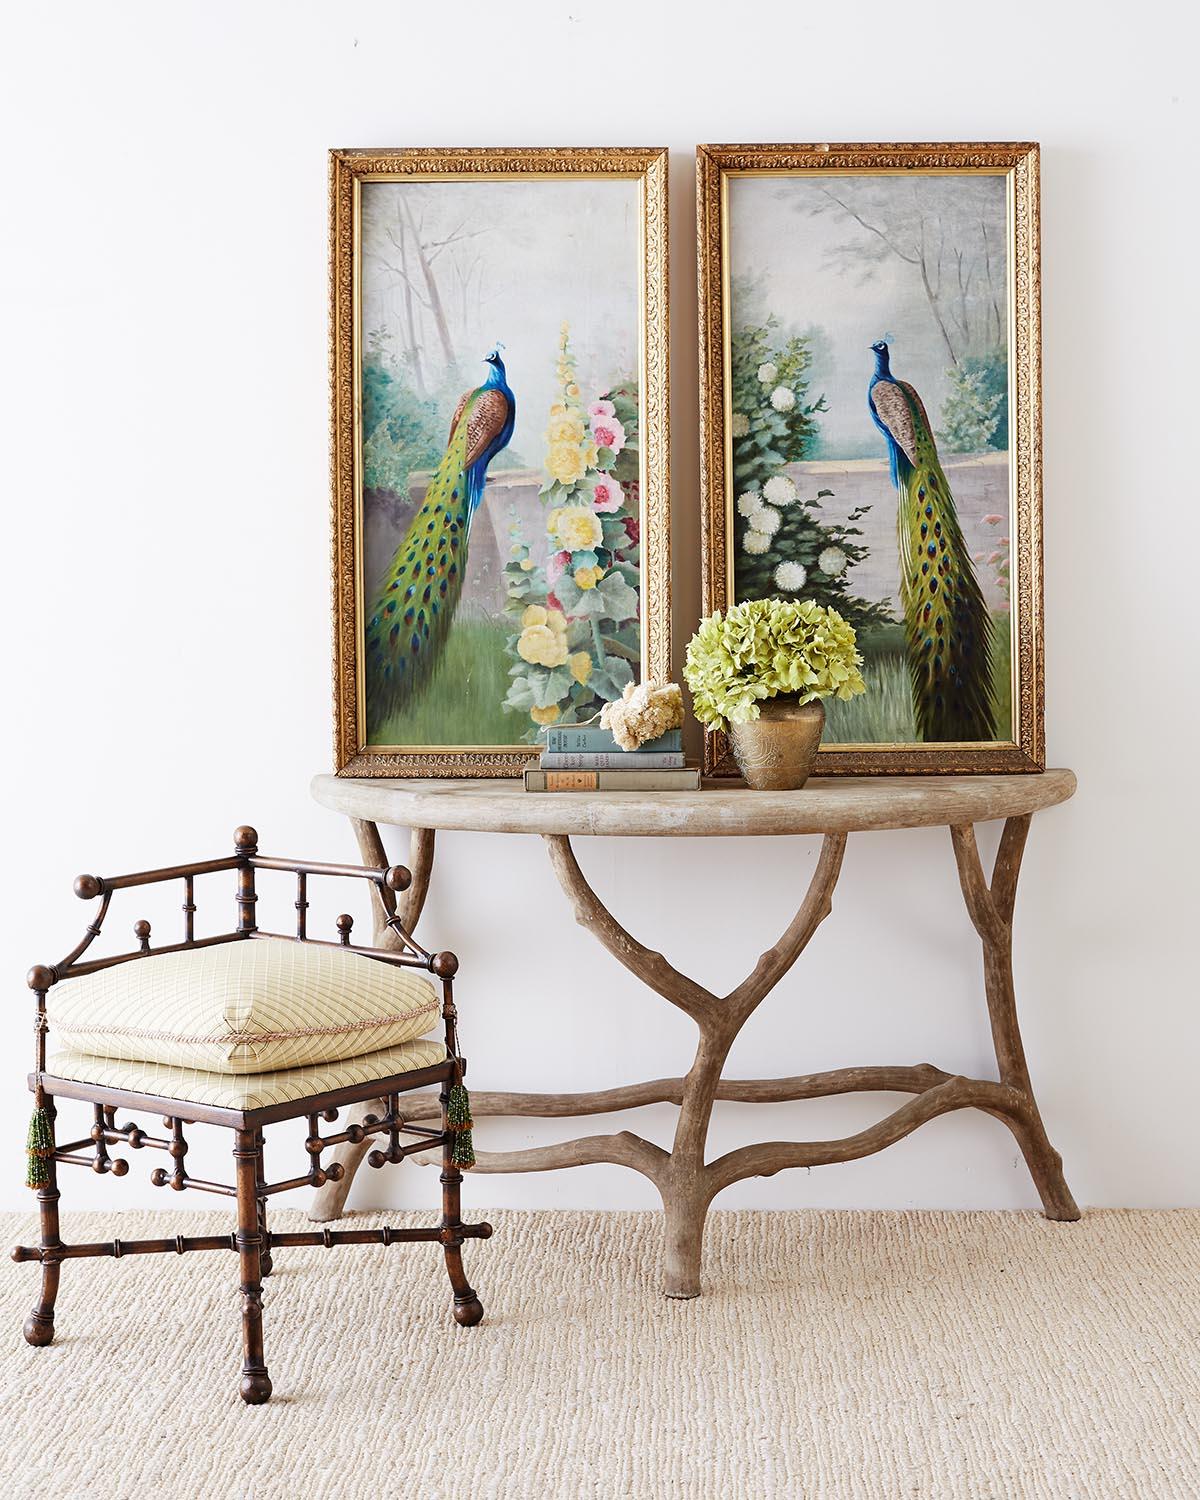 Gorgeous pair of early 20th century American school peacock paintings. Beautifully set in a floral landscape with bright vivid colors. Mounted in giltwood frames. Each canvas measures 35.5 inches high by 17.5 inches wide. Frames show signs of wear